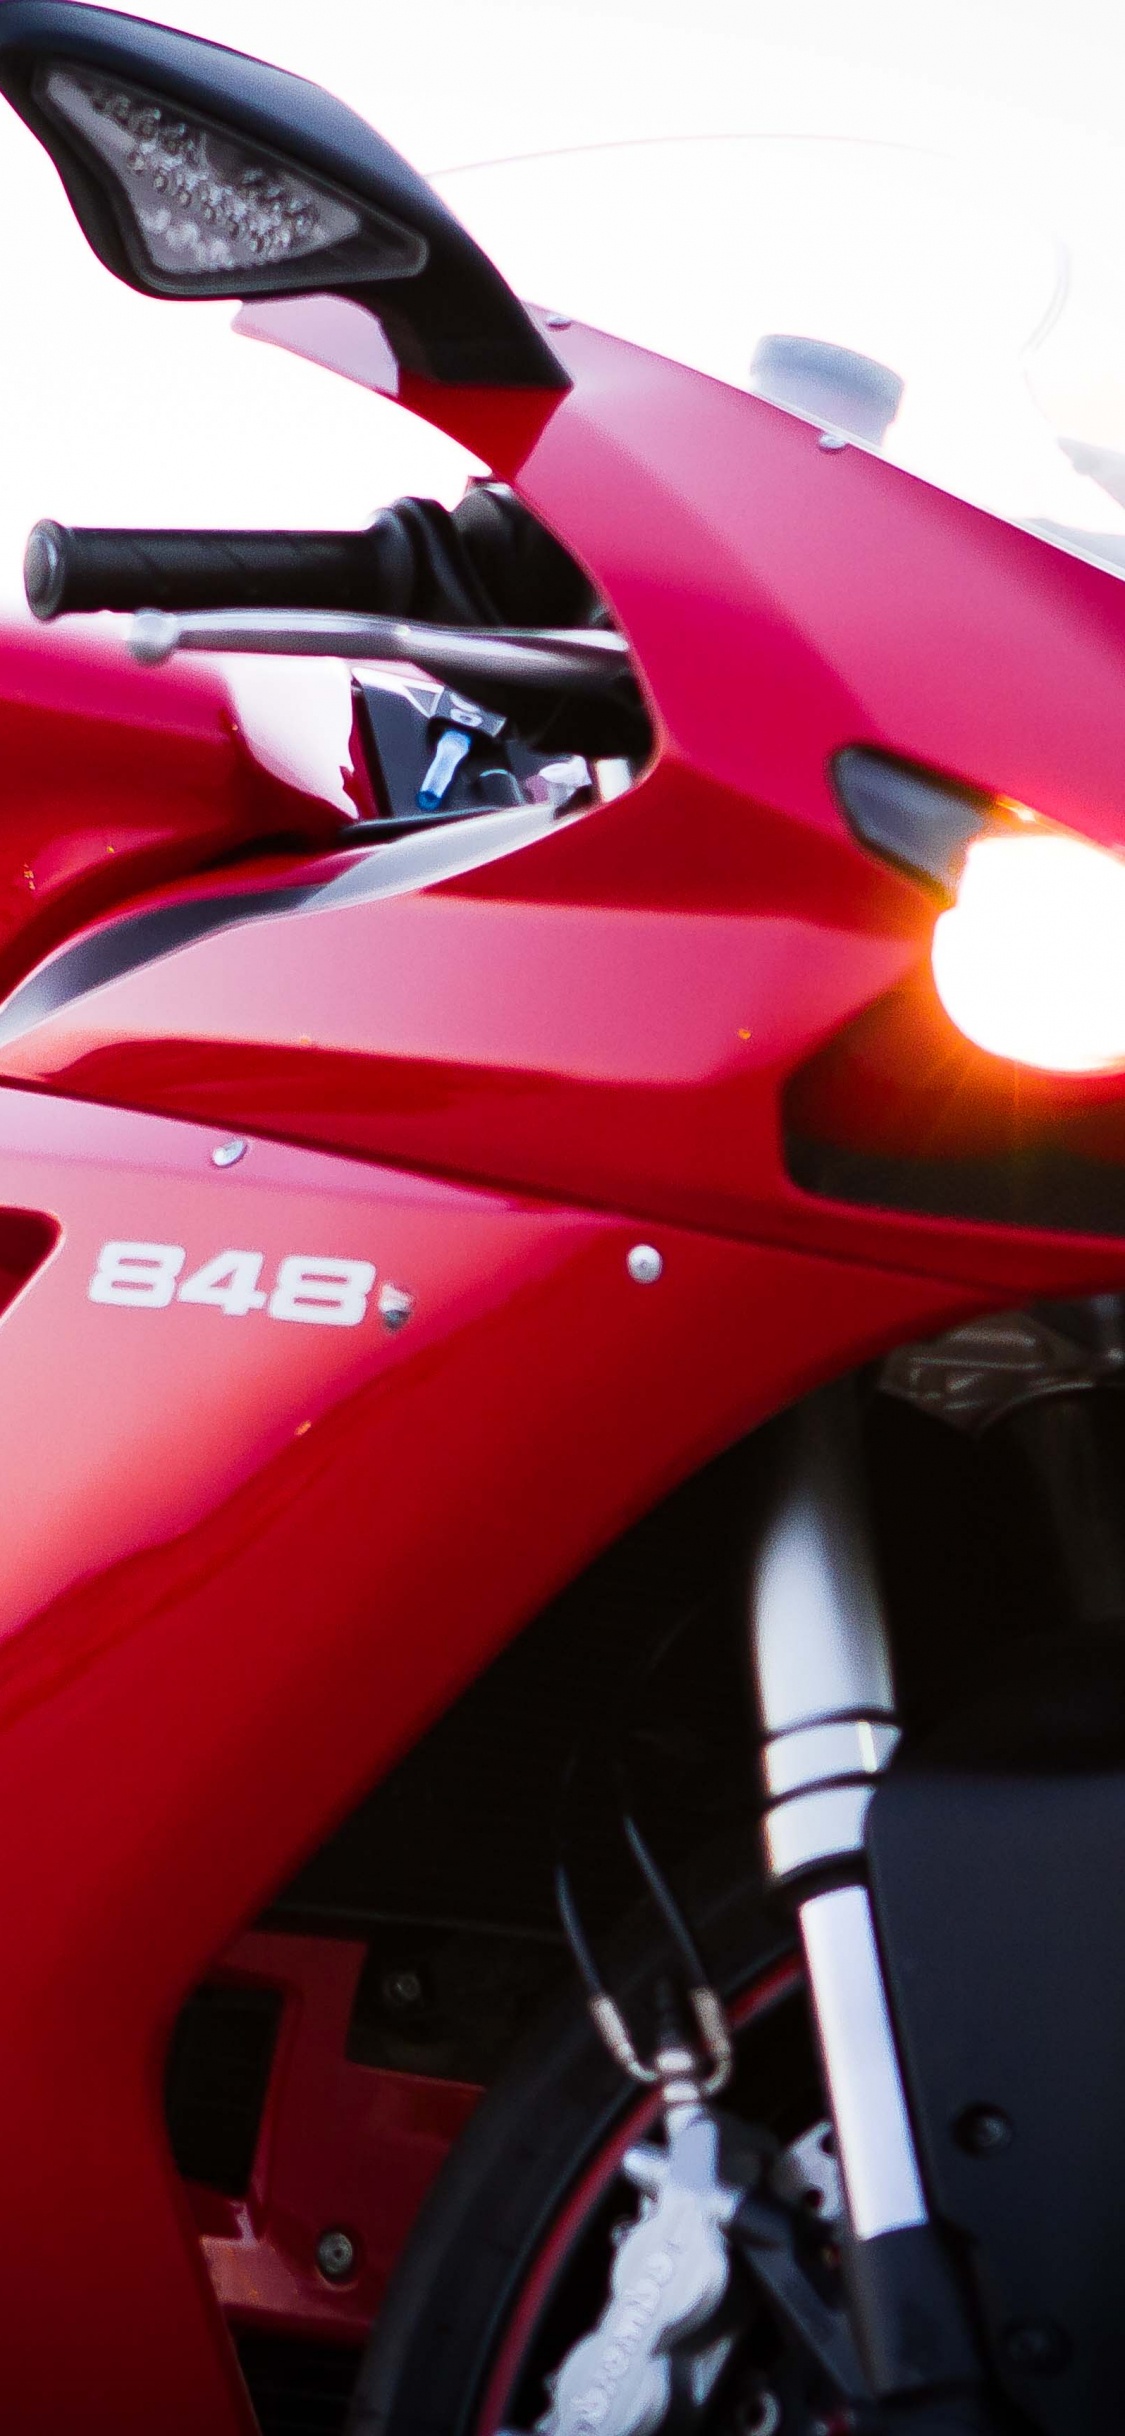 Red and Black Sports Bike. Wallpaper in 1125x2436 Resolution